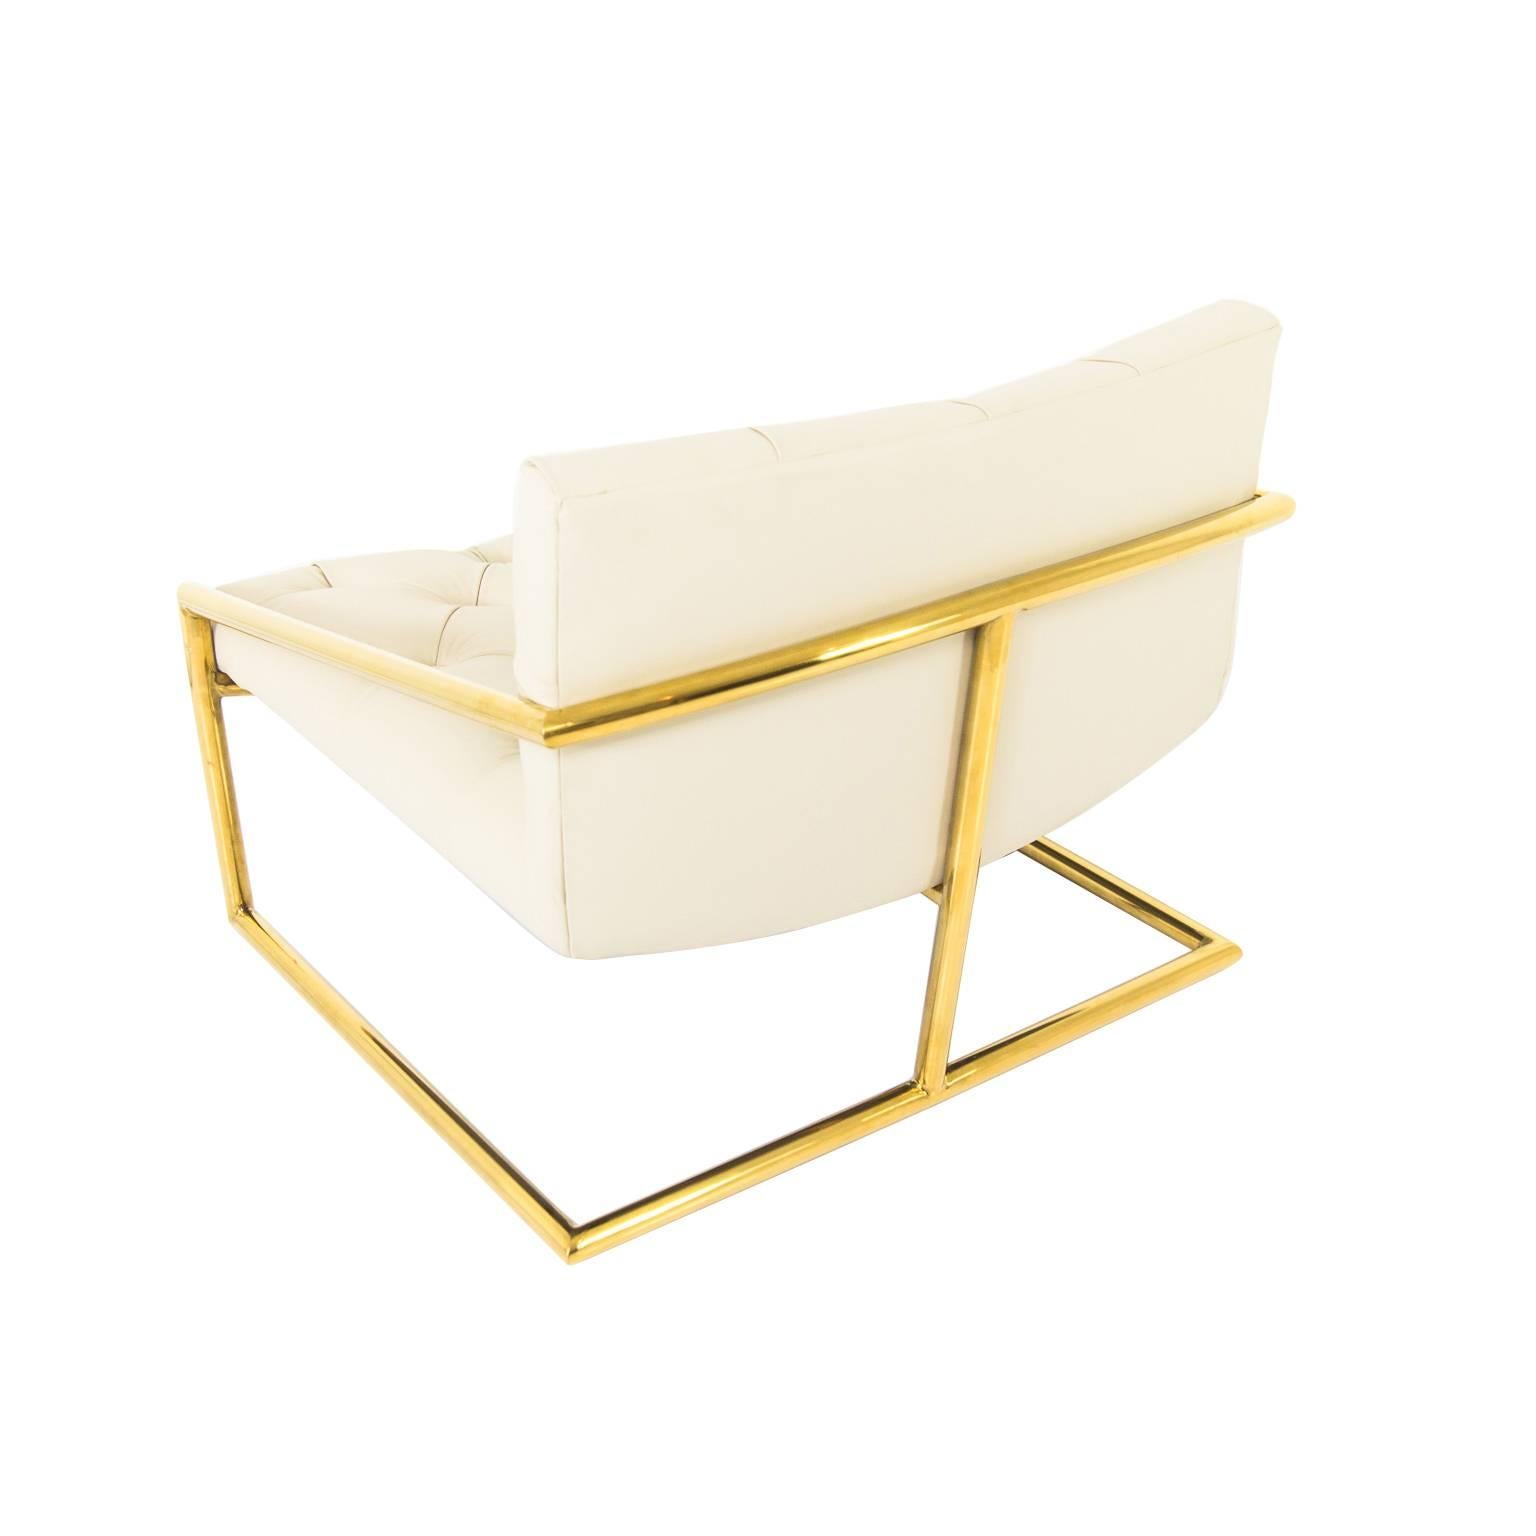 Modshop's Hampton chair is shown in hand-tufted Zenith milk leather with brass tubing for it's base.

Measures: 31